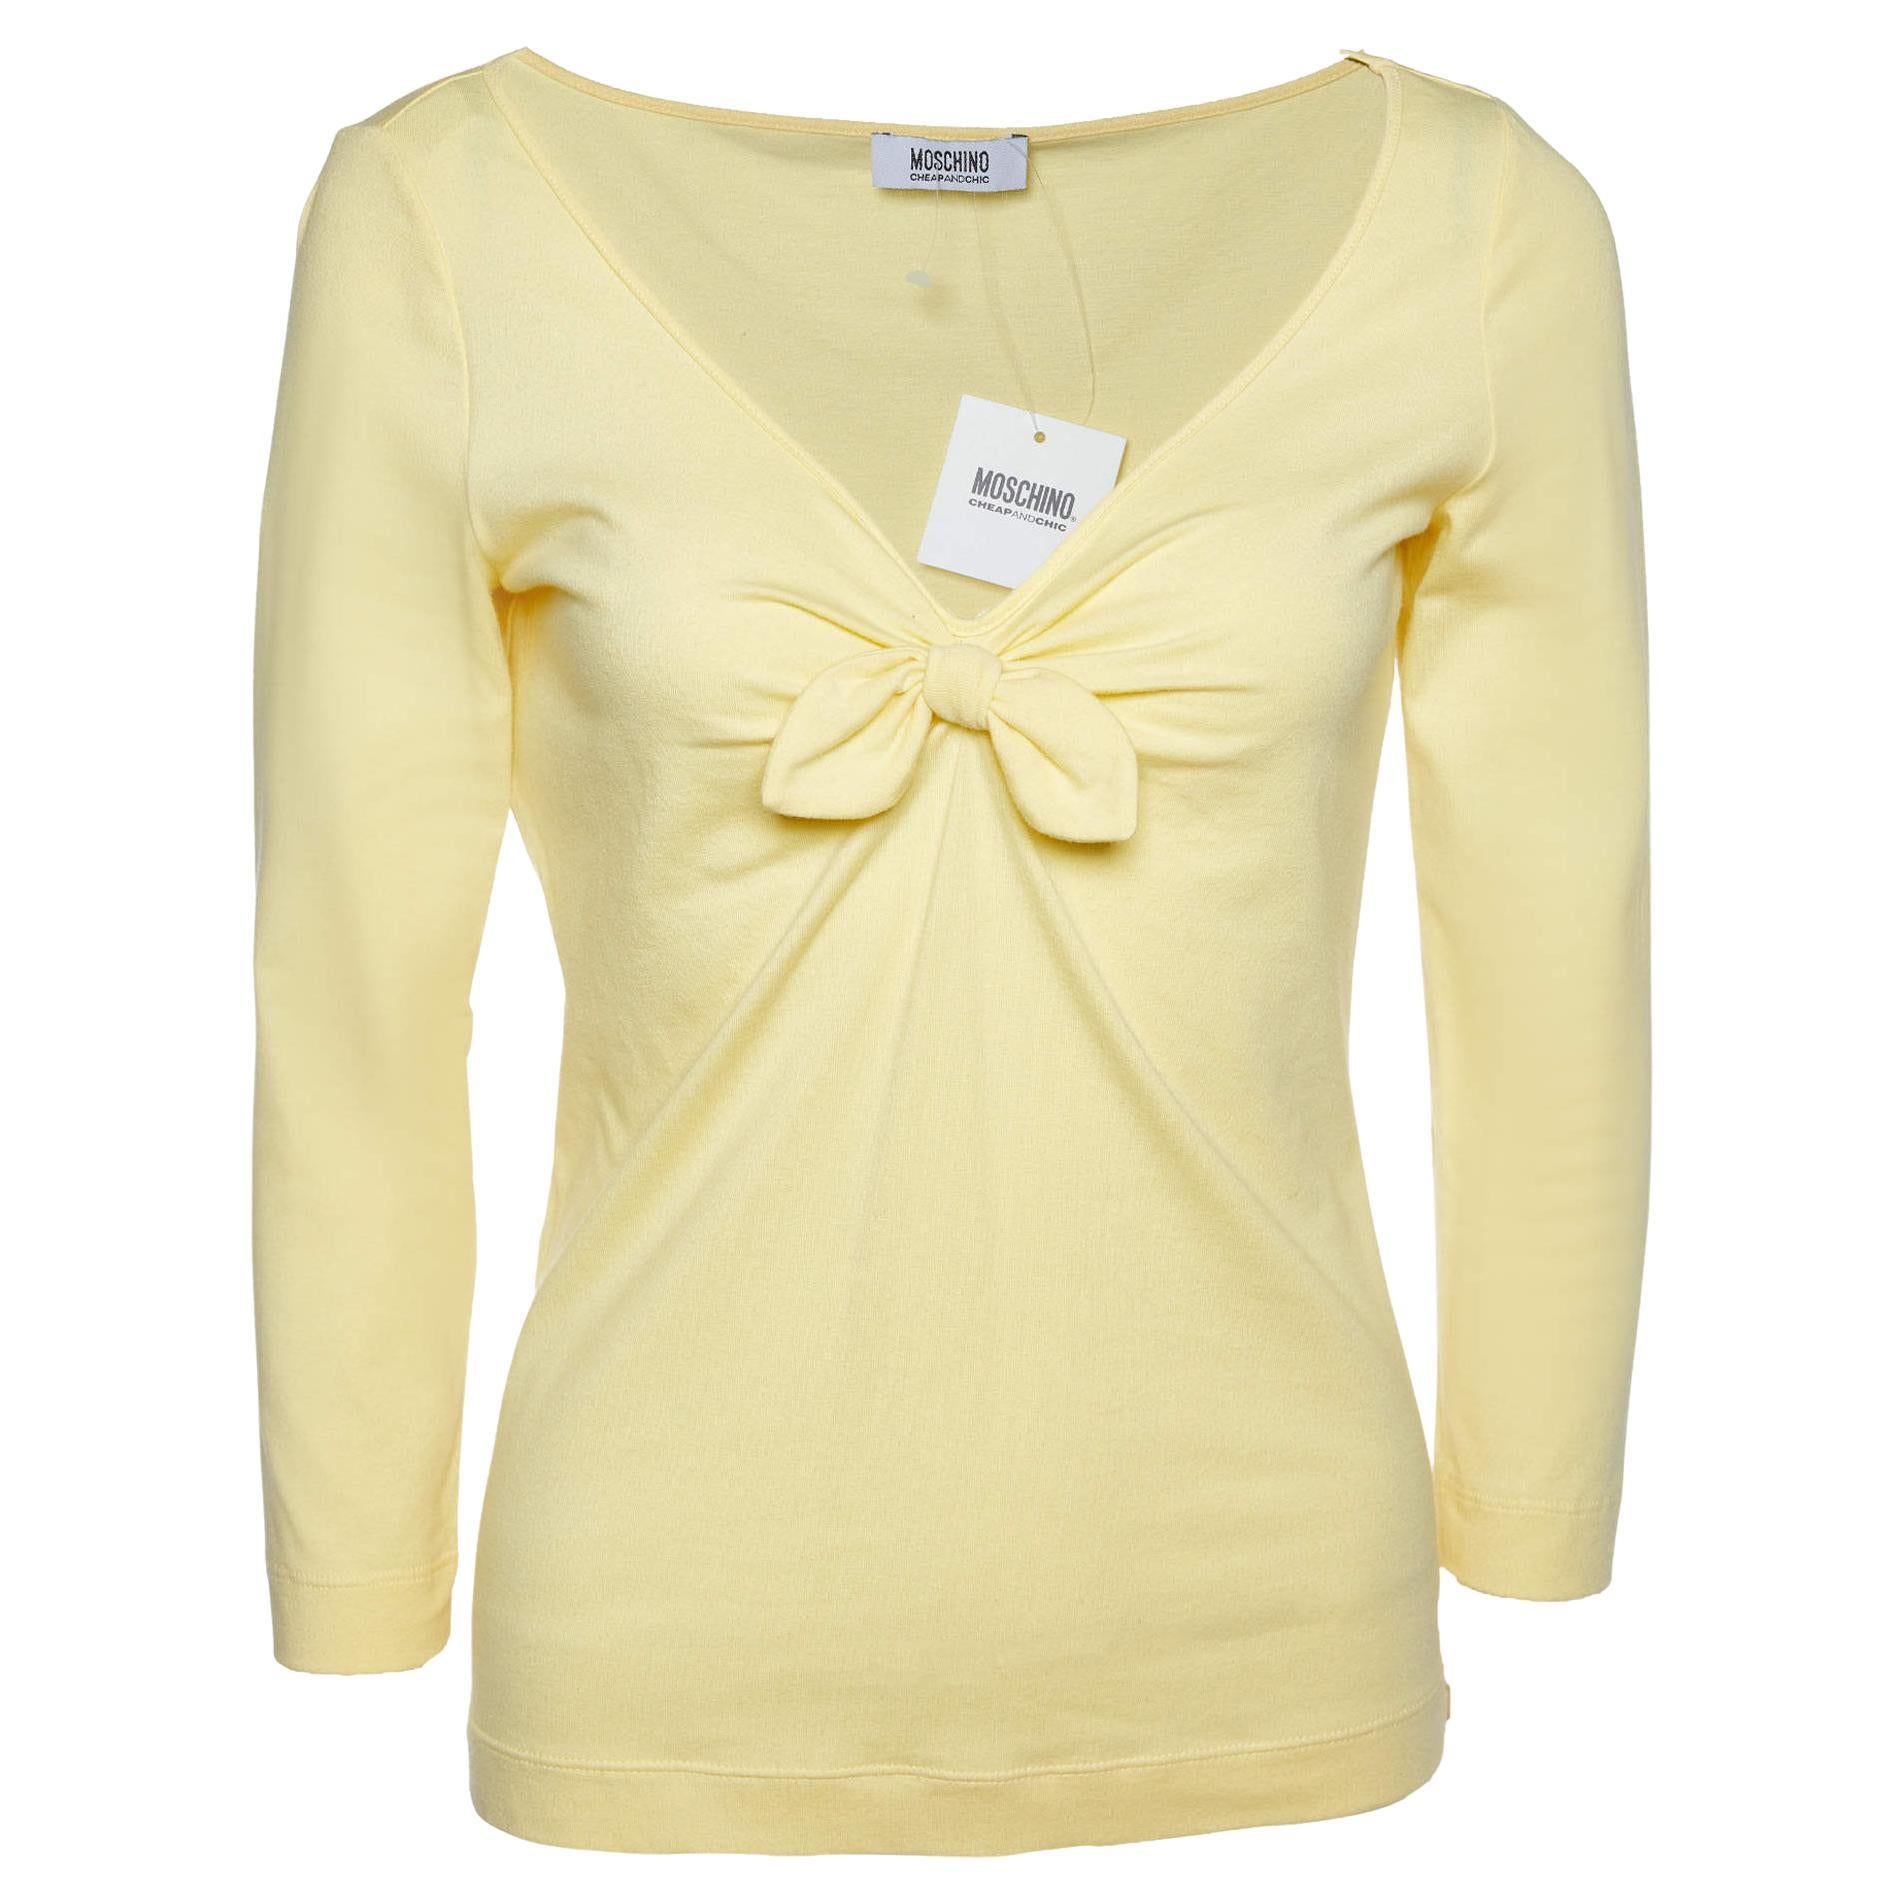 Moschino Cheap and Chic Yellow Cotton Knit Bow Detail T-Shirt M For Sale